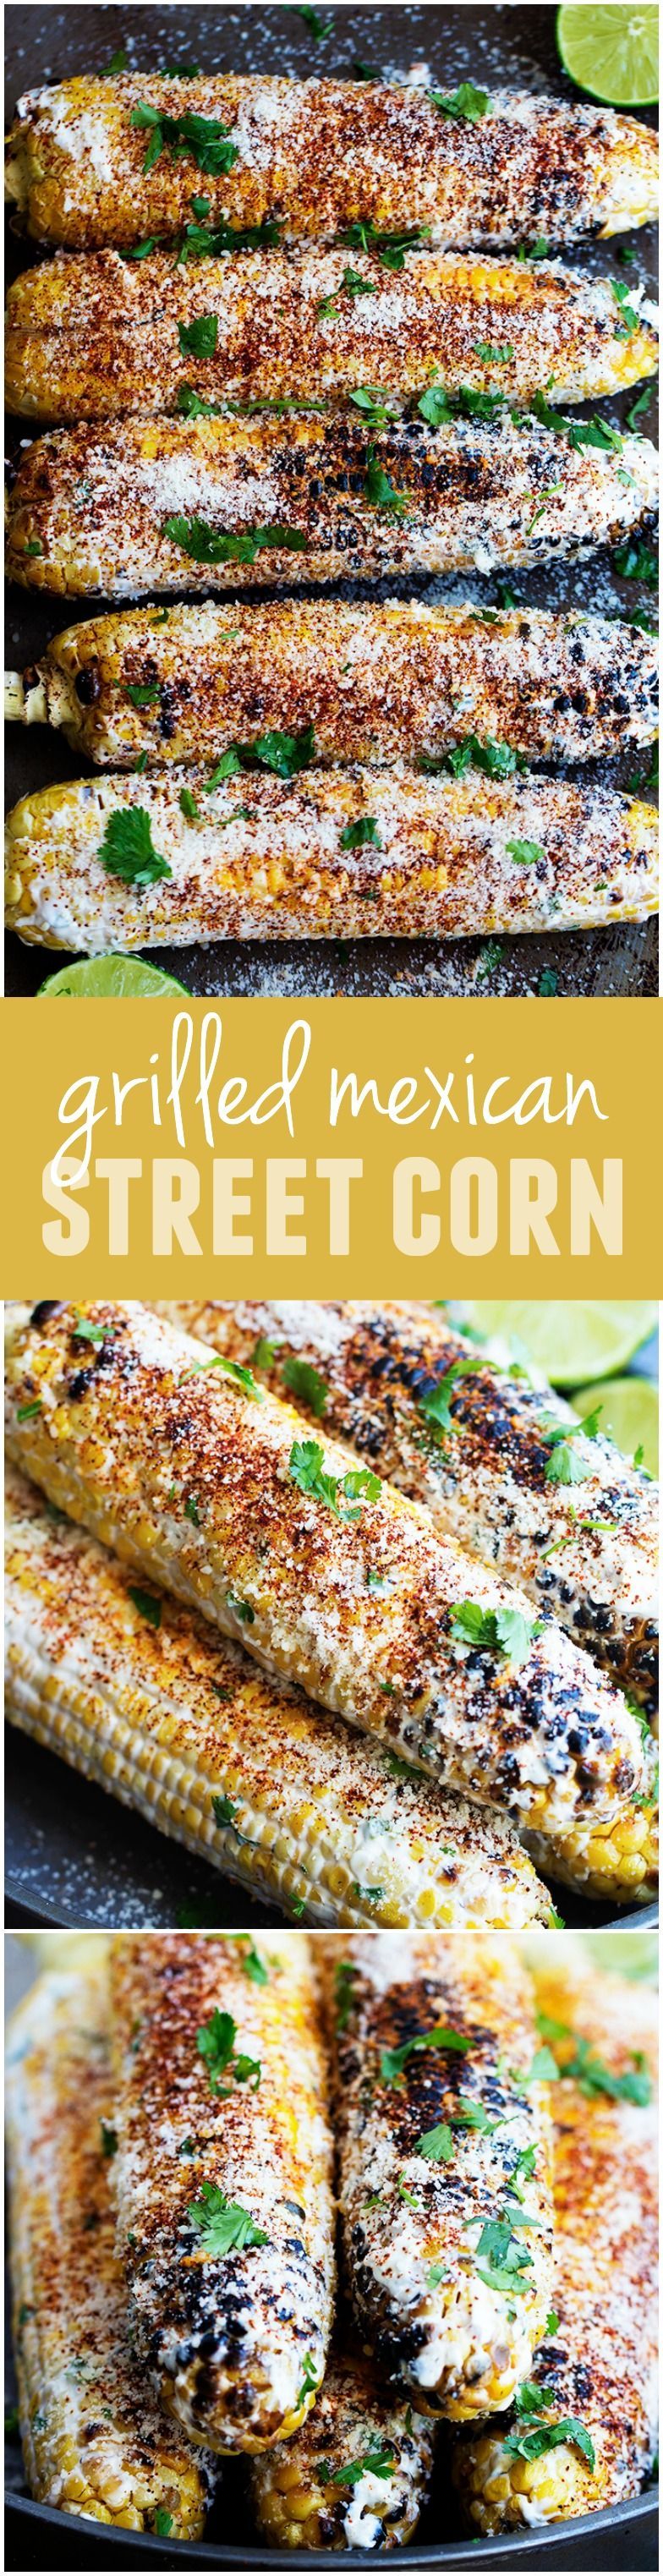 This Grilled Mexican Street Corn is full of so many amazing flavors! The BEST corn that I have ever had!